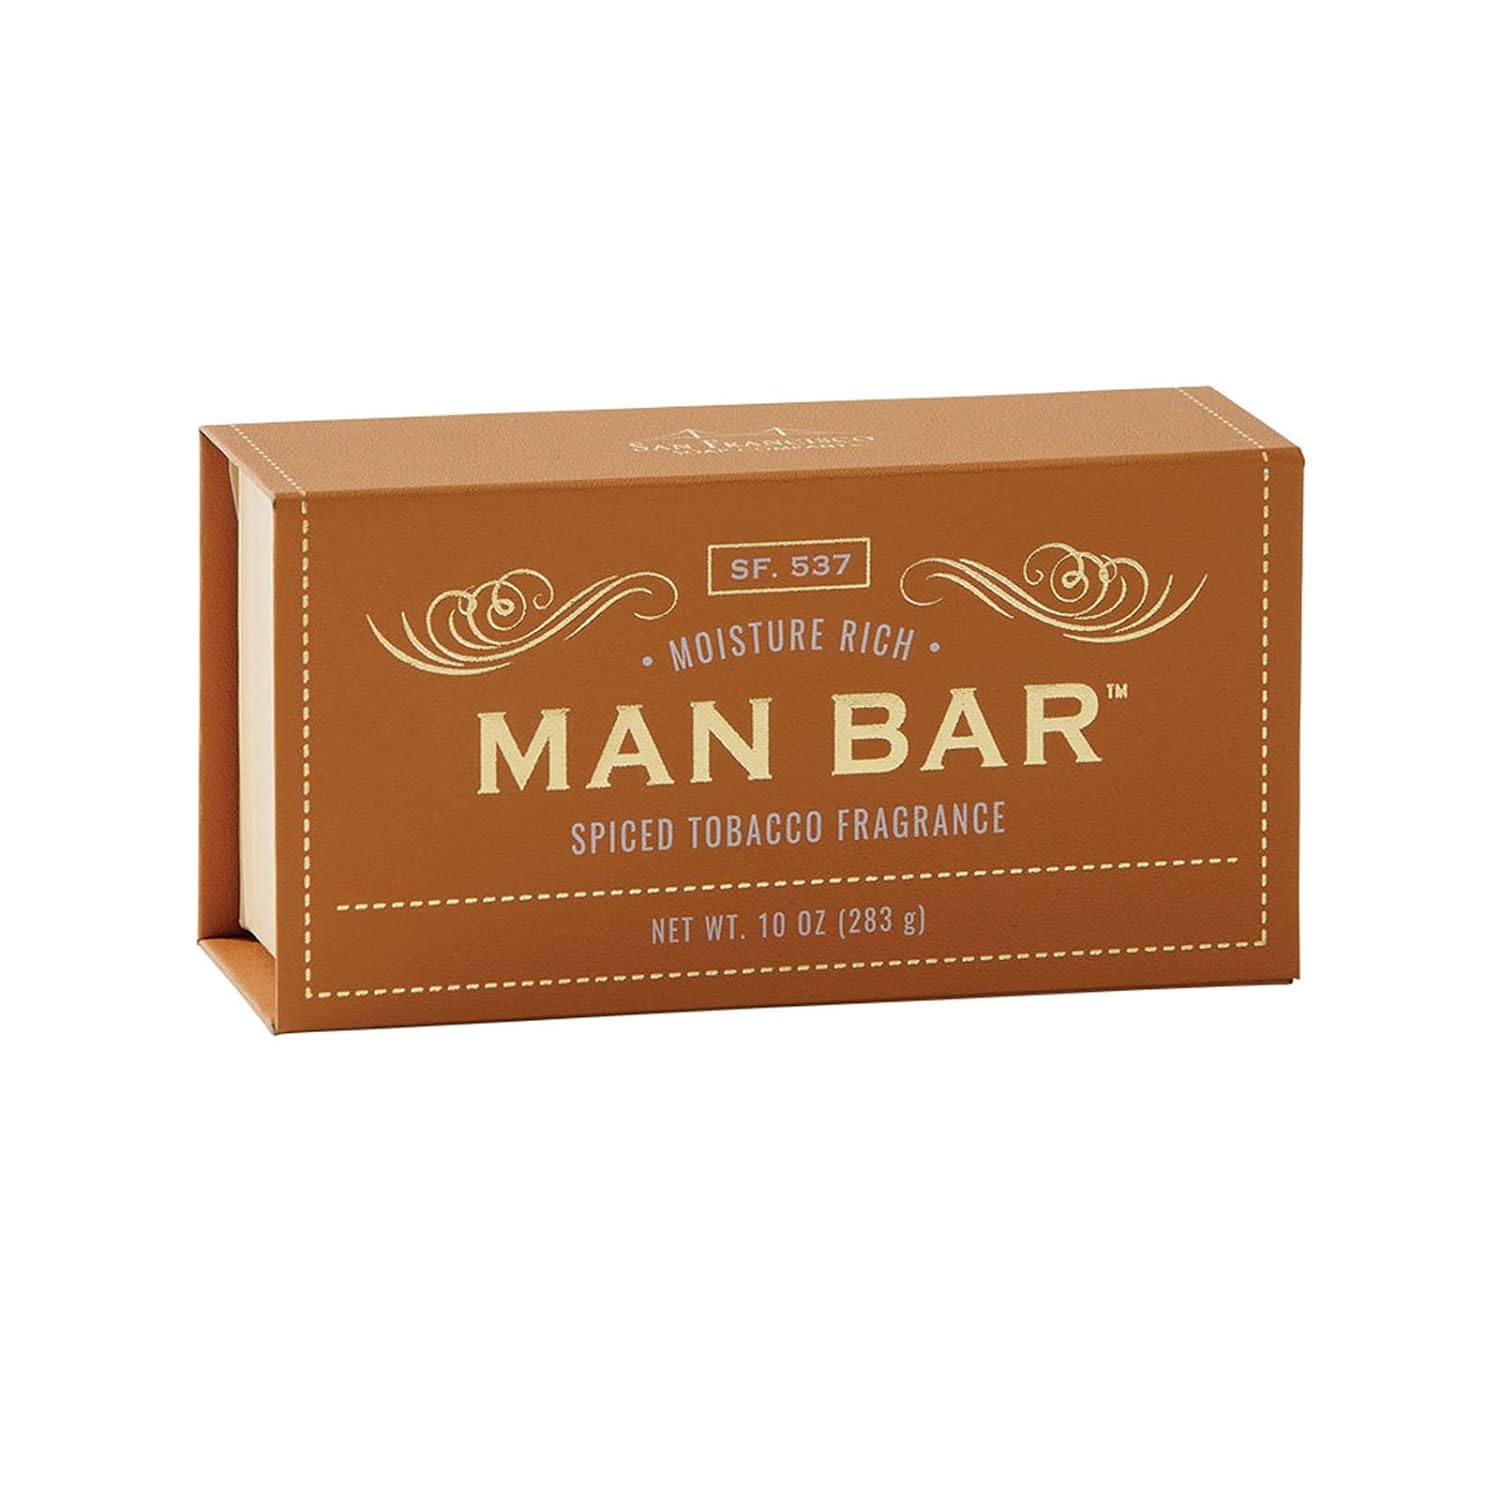 San Francisco Soap Company Spiced Tobacco Fragrance Man Bar - MOISTURE RICH - No Harmful Chemicals - Good for All Skin Types - Made in the USA